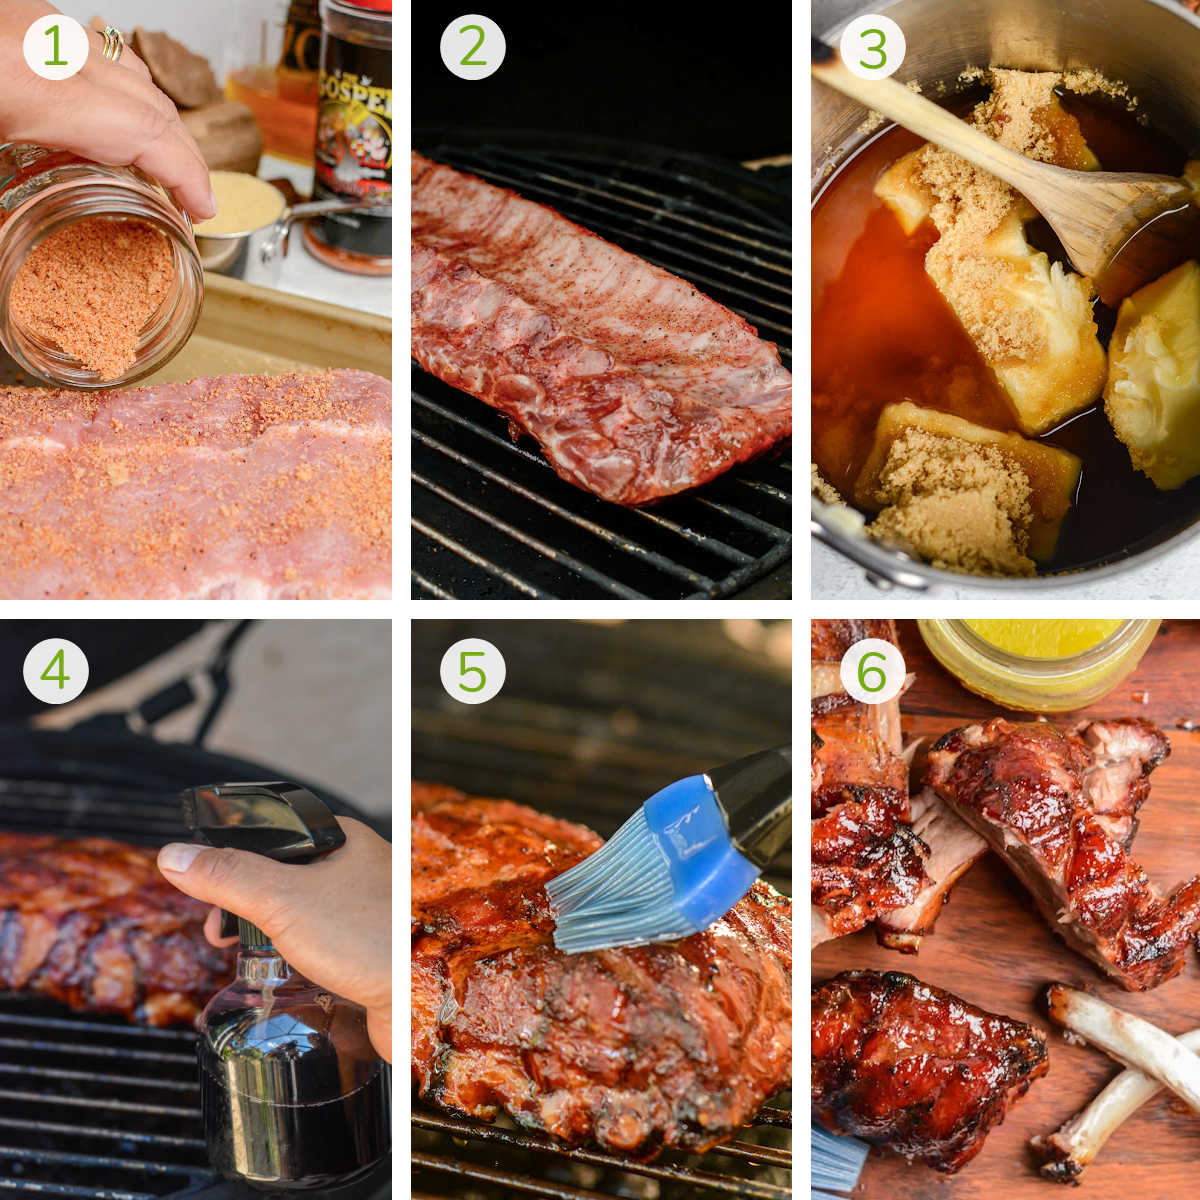 six process photos showing how to add the rub. put it in on the smoker, make the glaze, spritzing with coca cola, and brush it on the ribs with the final photo showing them chopped.